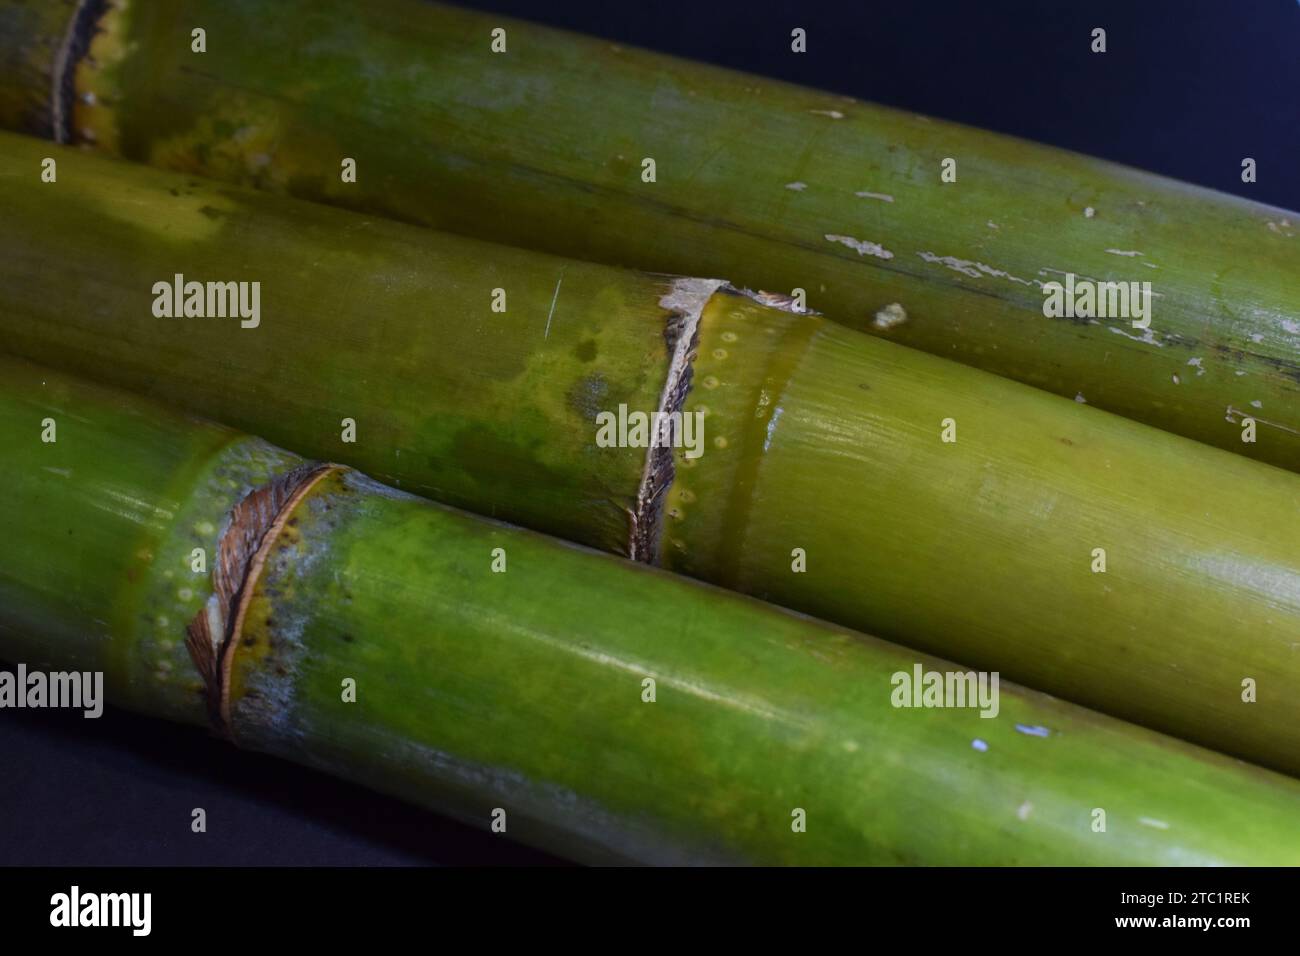 Close up shot of green sugarcane branch or trunk (Saccharum officinarum) from Poaceae family Stock Photo